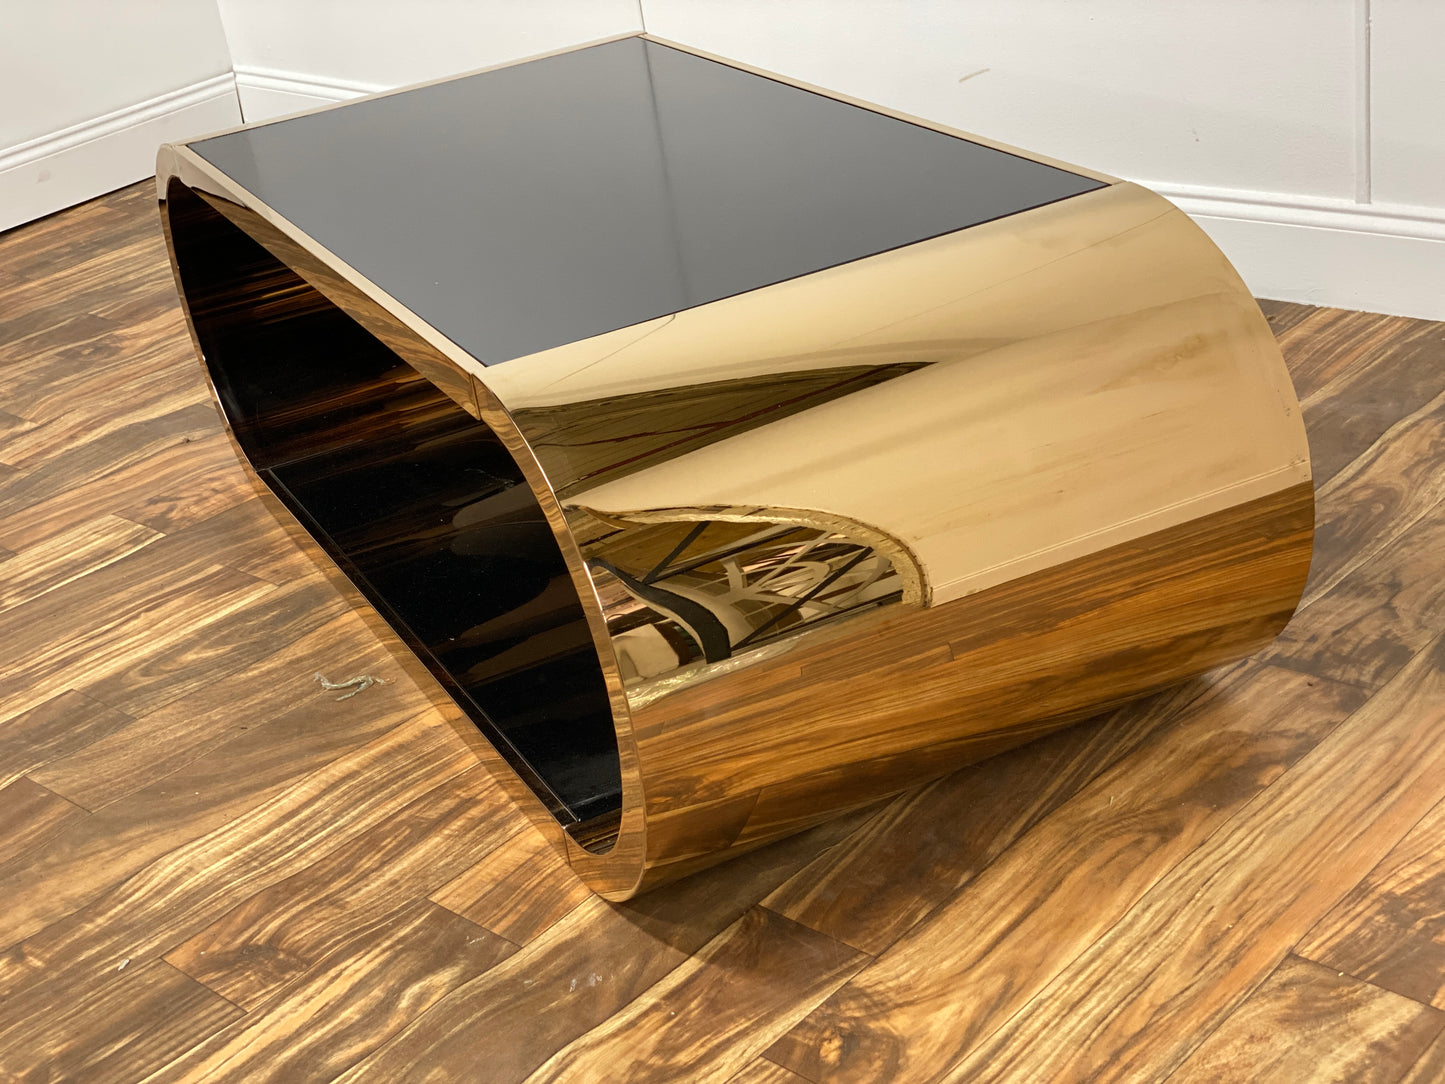 BRONZE AND BLACK GLASS COFFEE TABLE